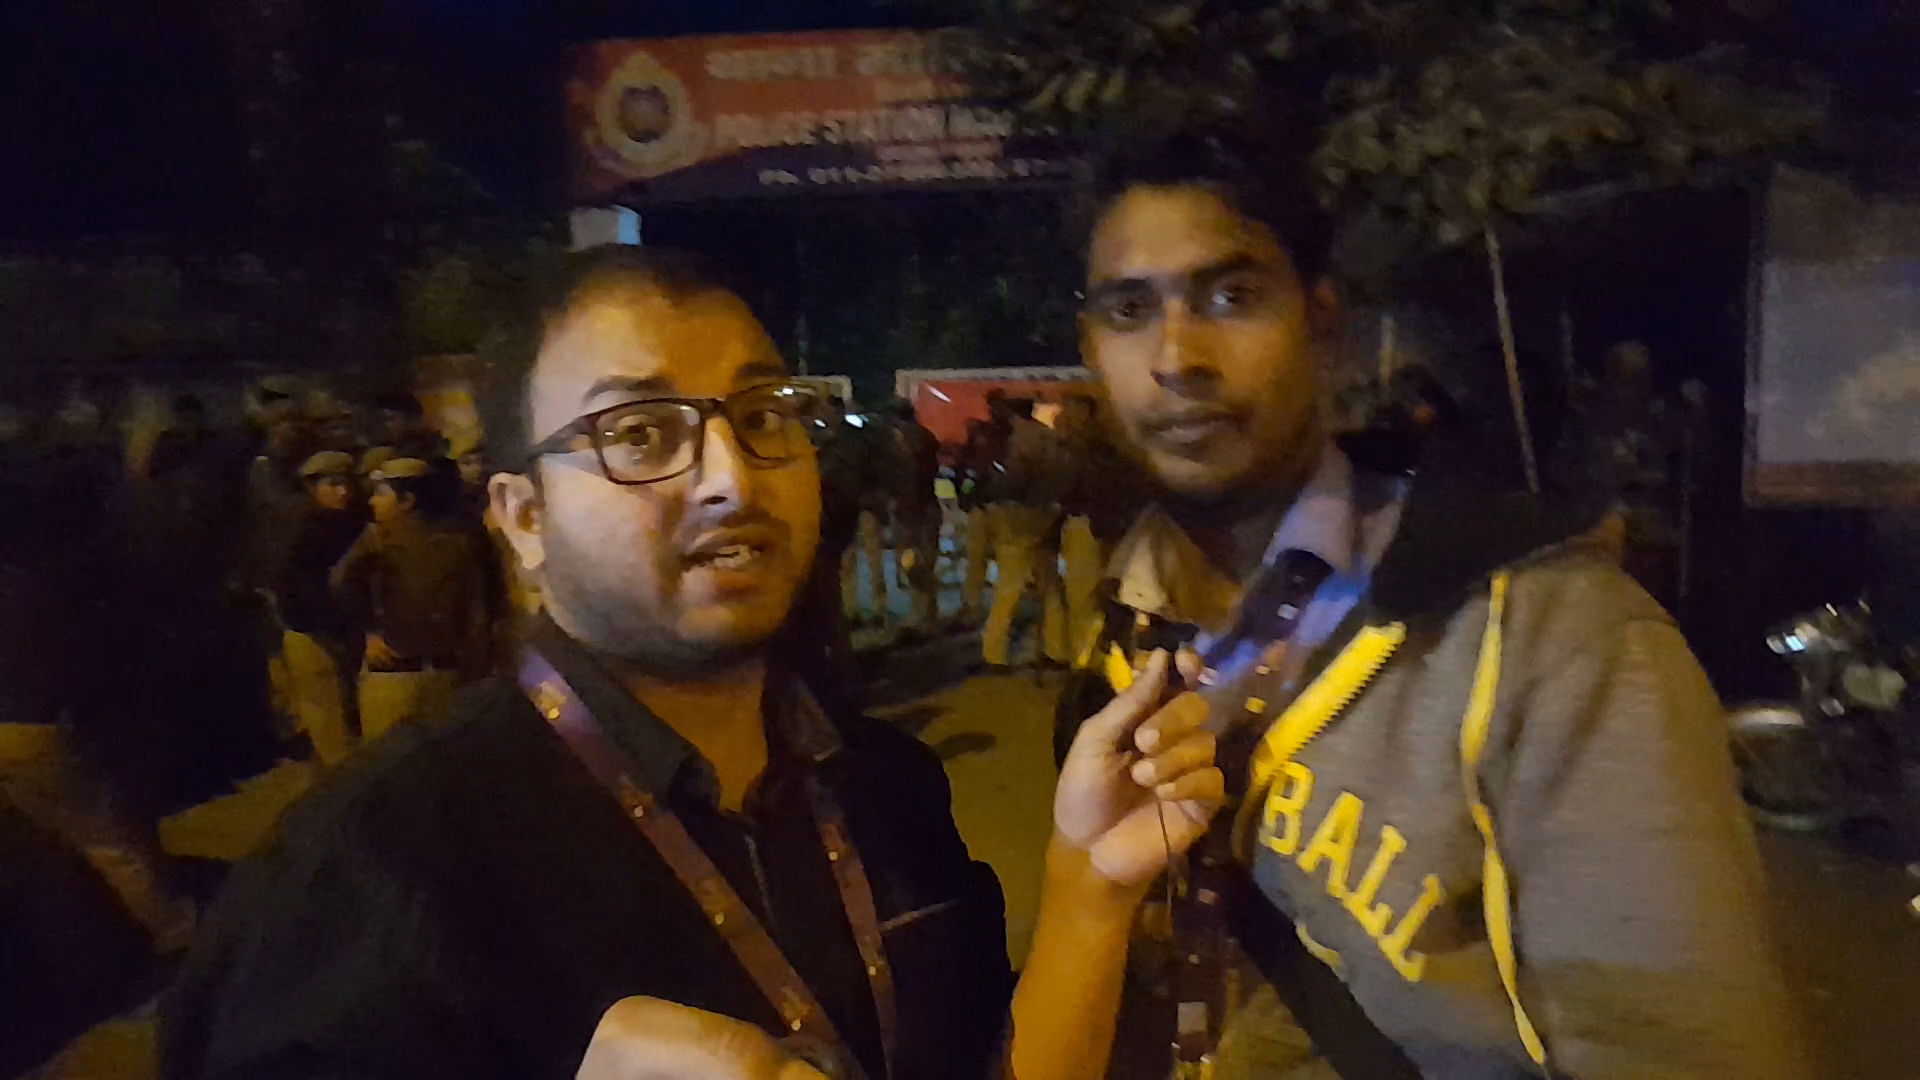 Correspondent Anant Prakash (L) and Cameraperson Shiv Kumar Maurya were beaten up by Delhi Police officers. (Photo: <b>The Quint</b>)